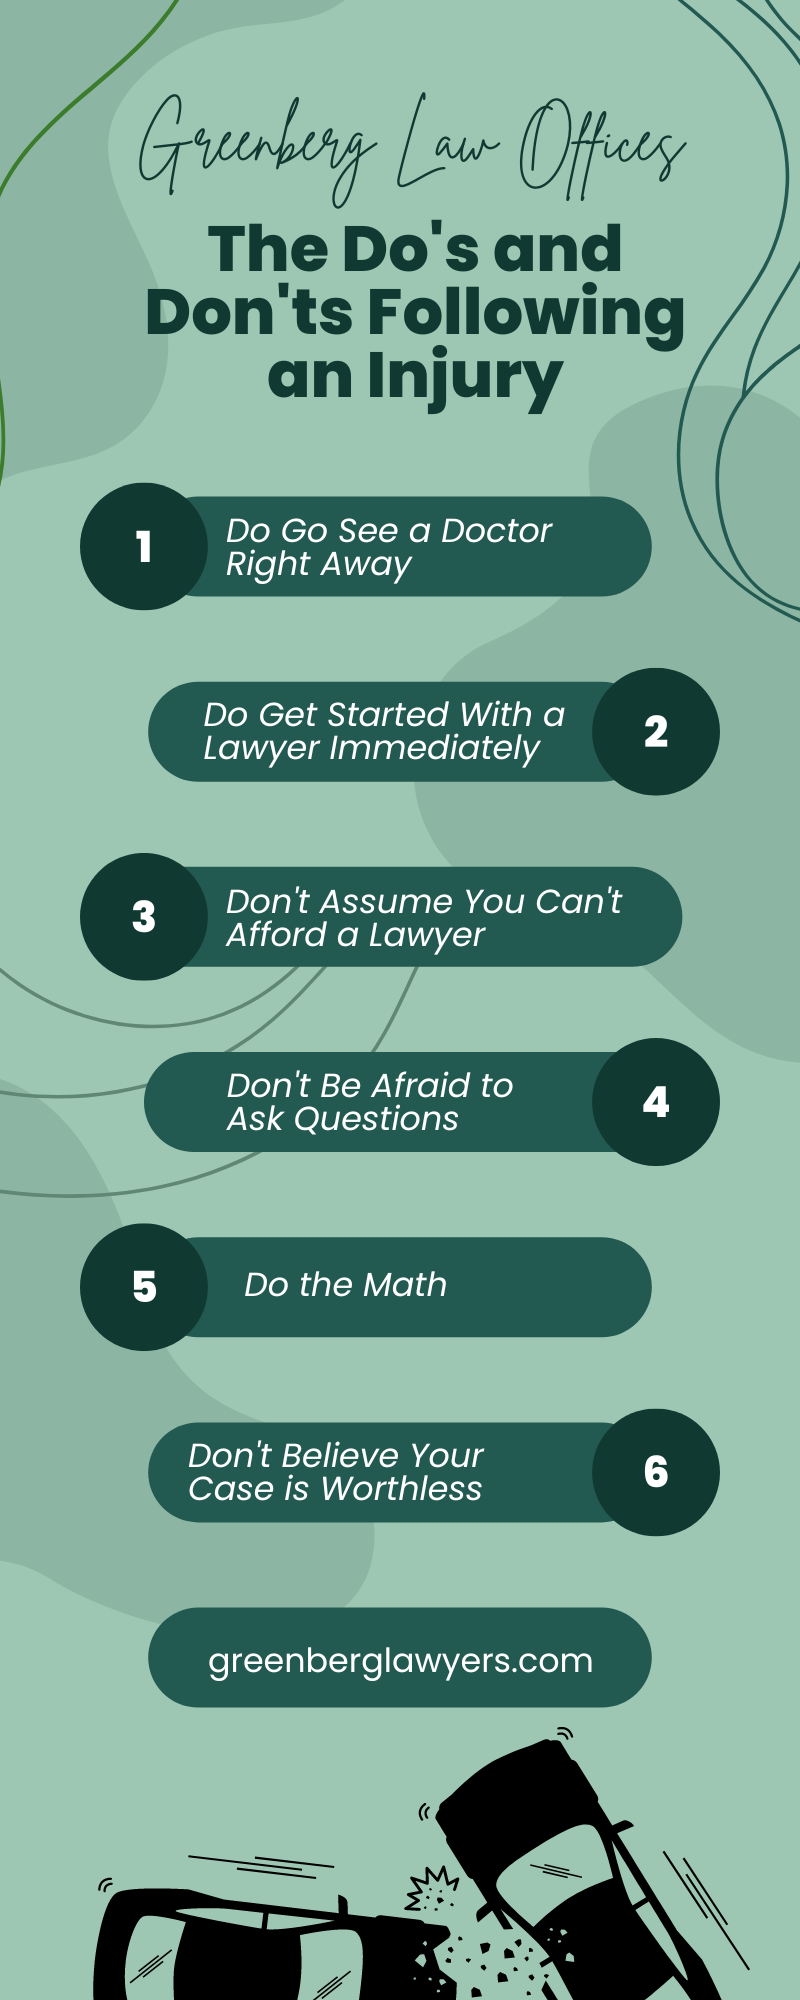 The Do's and Don'ts Following an Injury Infographic